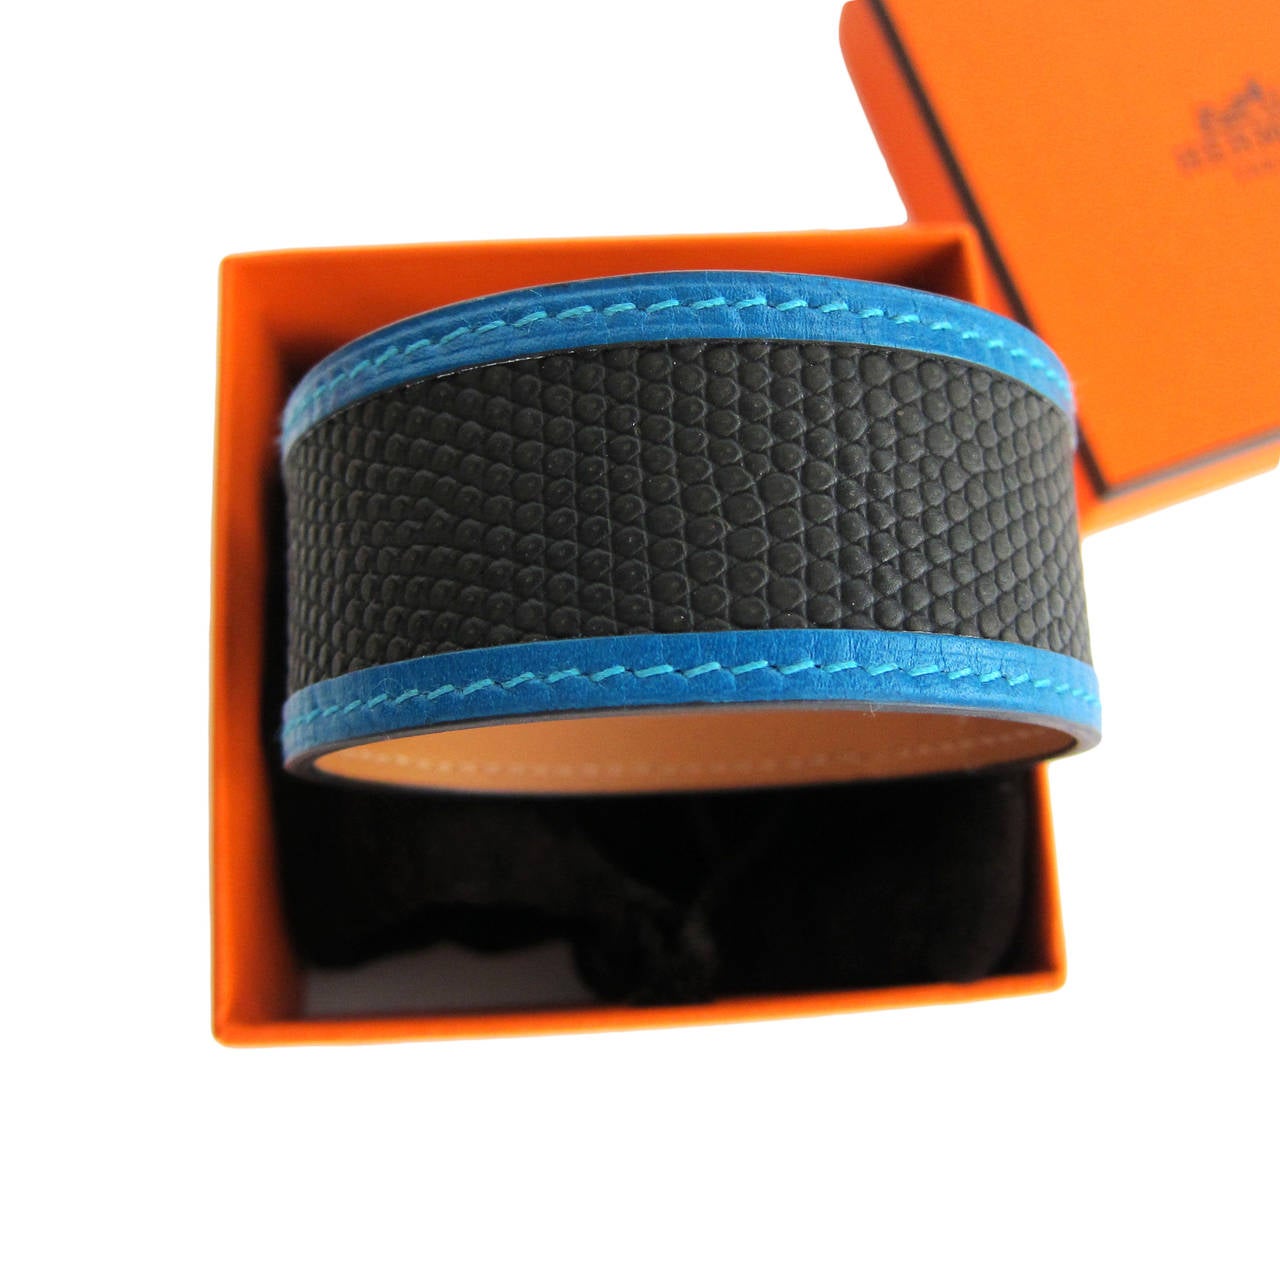 Hermes Black Blue Lizard Calf Leather Petit H Bracelet Cuff One of a Kind

World Exclusive from the Hermes Petit H Collection
Brand New in Box 
Coming store fresh with Hermes pouch, box and ribbon
Lizard and Calf Bracelet Petit H Bracelet
Standard